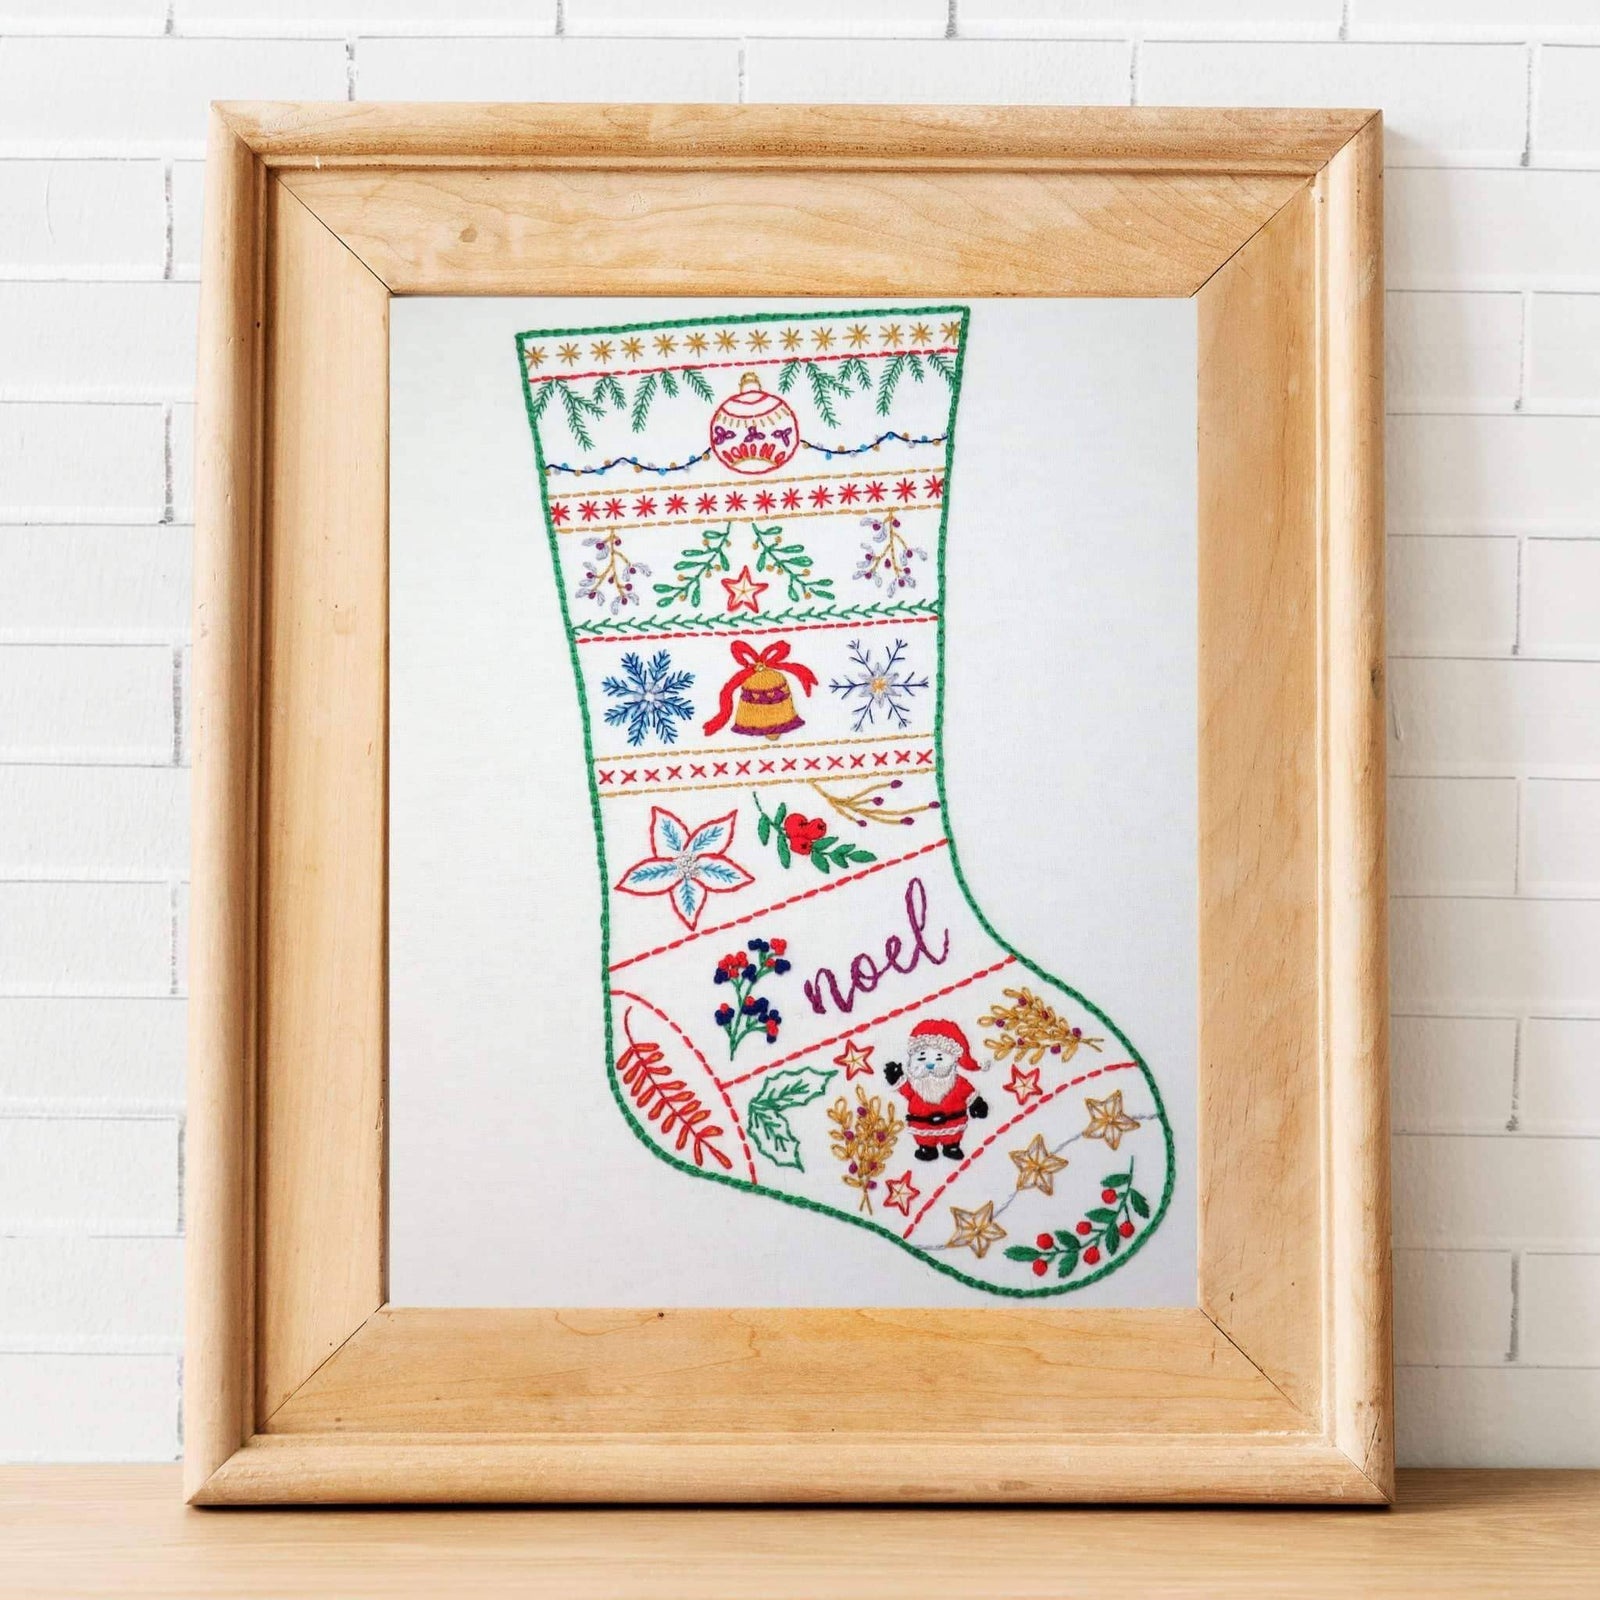 Christmas Stocking Pre Printed Embroidery Fabric Panel , Pre Printed Fabric Pattern , StitchDoodles , christmas, embroidery hoop kit, Embroidery Kit, embroidery kit for adults, embroidery kit fro beginners, embroidery kits for adults, embroidery kits for beginners, hand embroidery fabric, modern embroidery kits , StitchDoodles , shop.stitchdoodles.com